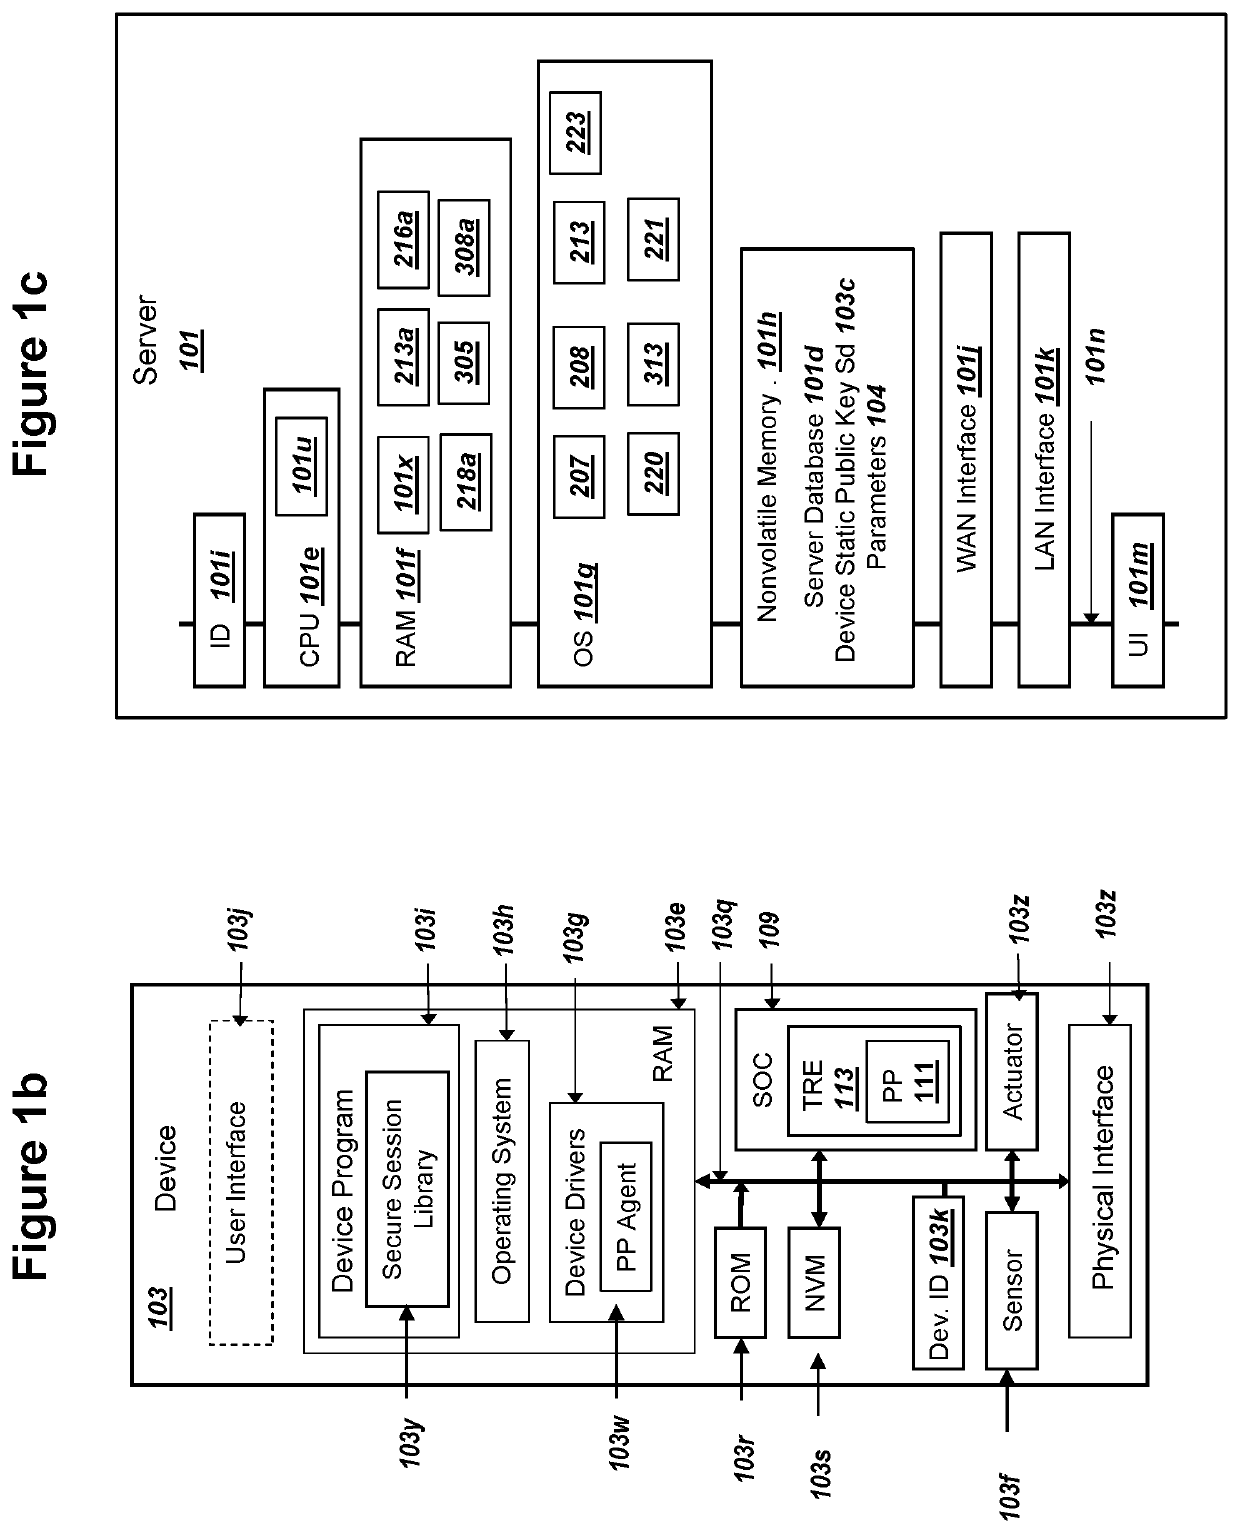 Mutually authenticated ecdhe key exchange for a device and a network using multiple pki key pairs